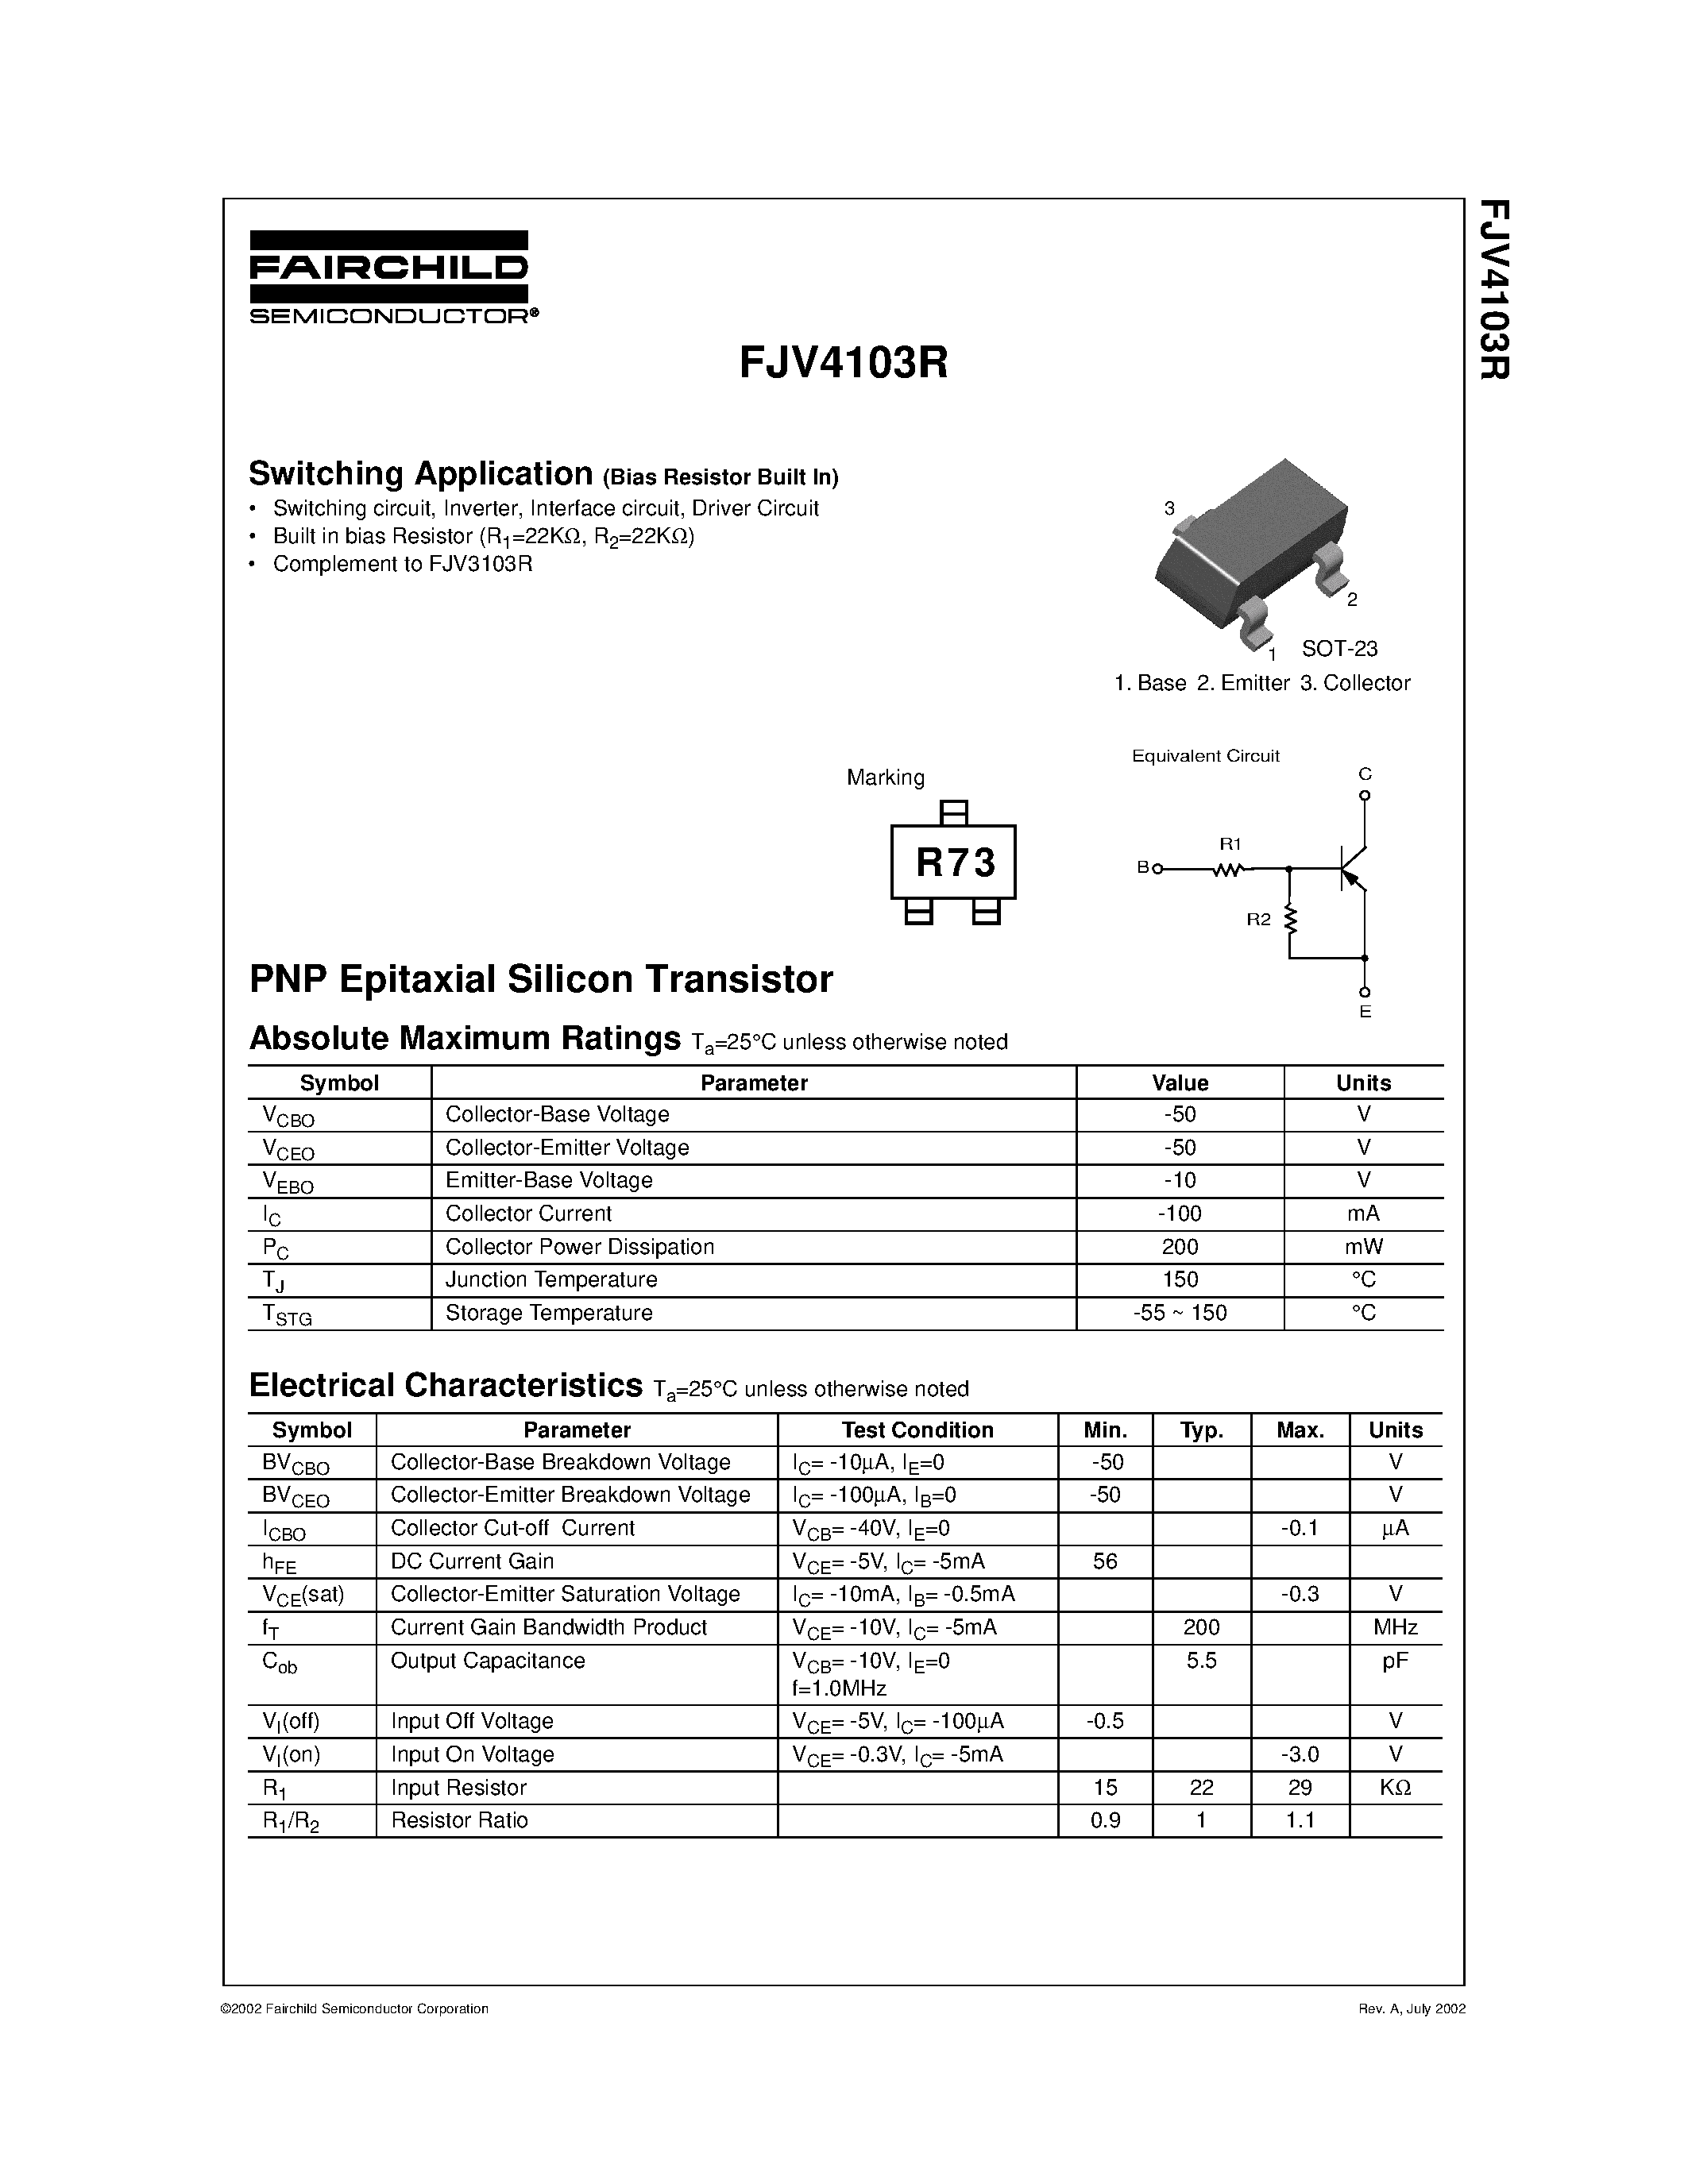 Datasheet FJV4103R - PNP Epitaxial Silicon Transistor page 1